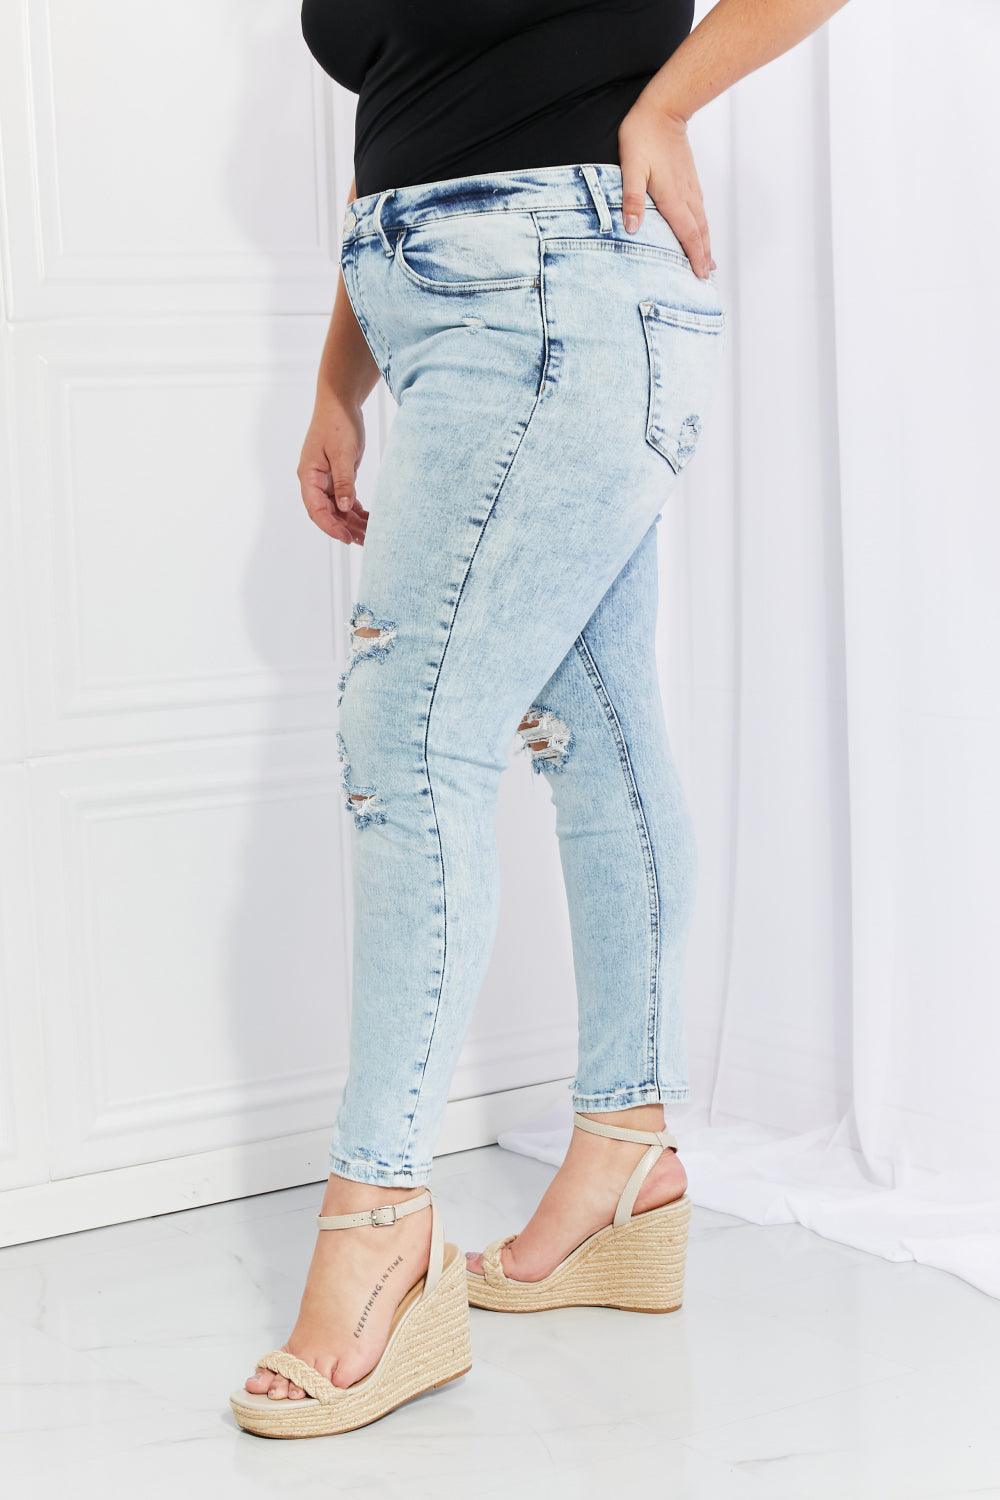 VERVET On The Road Full Size Distressed Jeans - The Fiery Jasmine